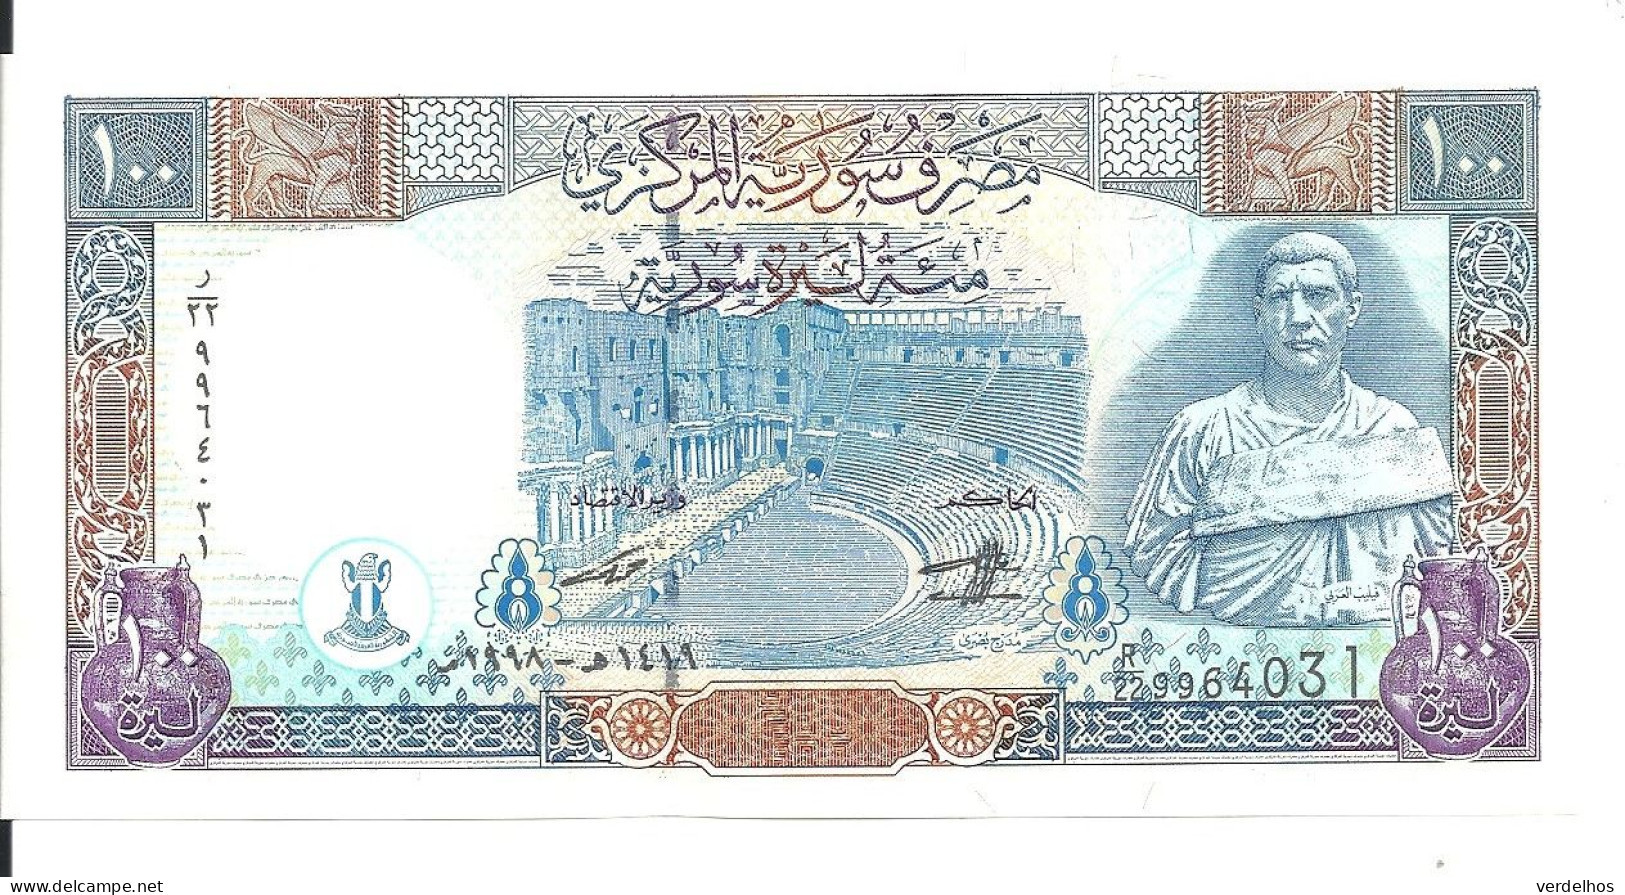 SYRIE 100 POUNDS 1998 UNC P 108 - Syria